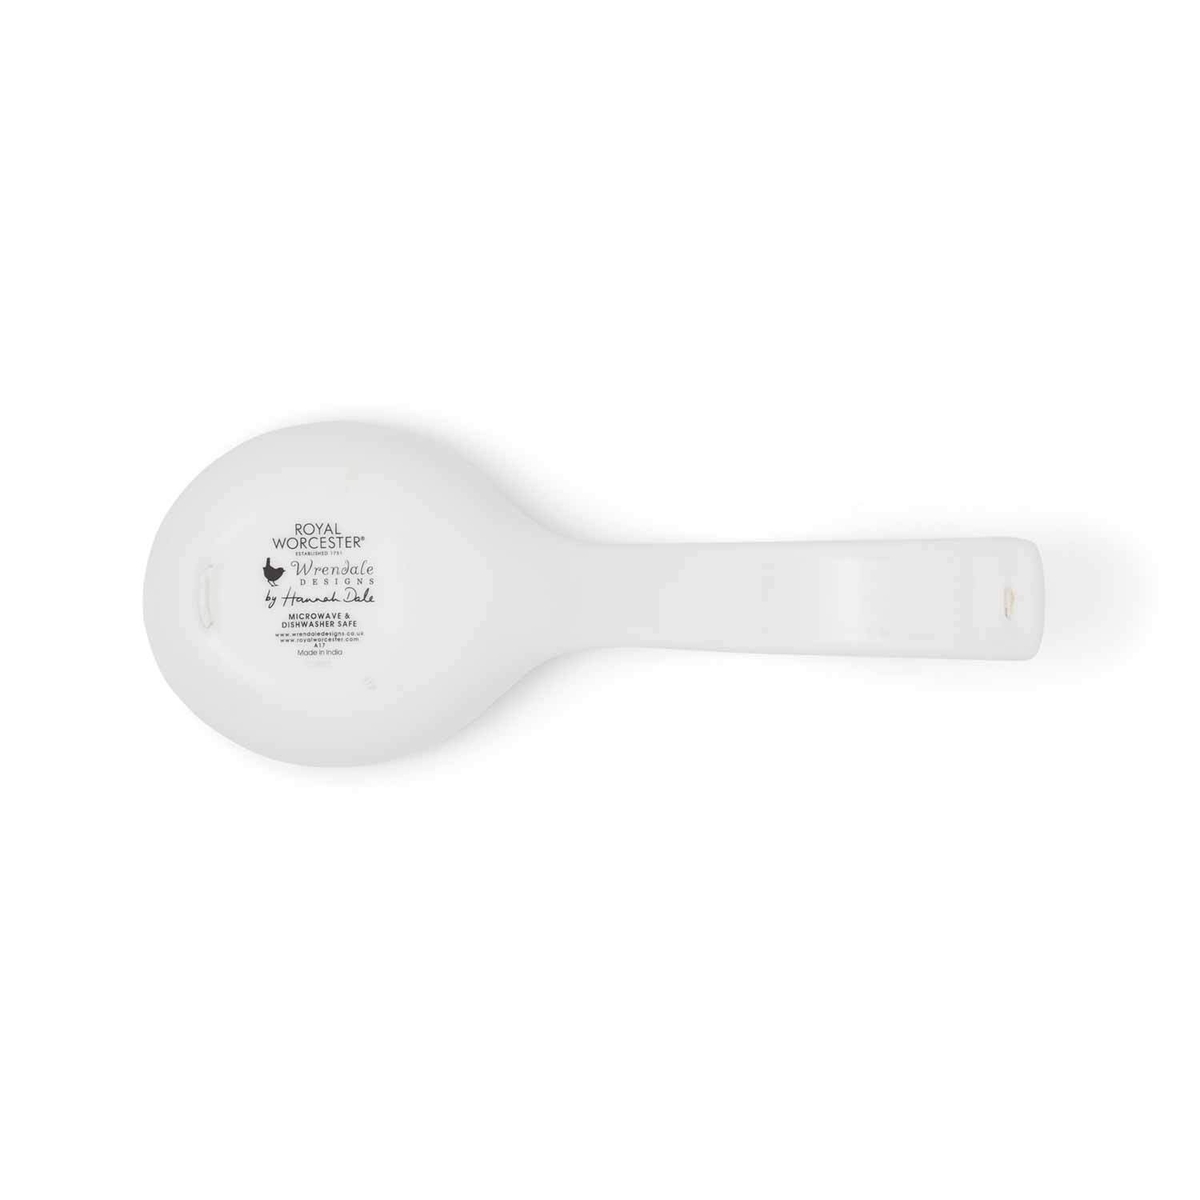 Spoon Rest Mice image number null